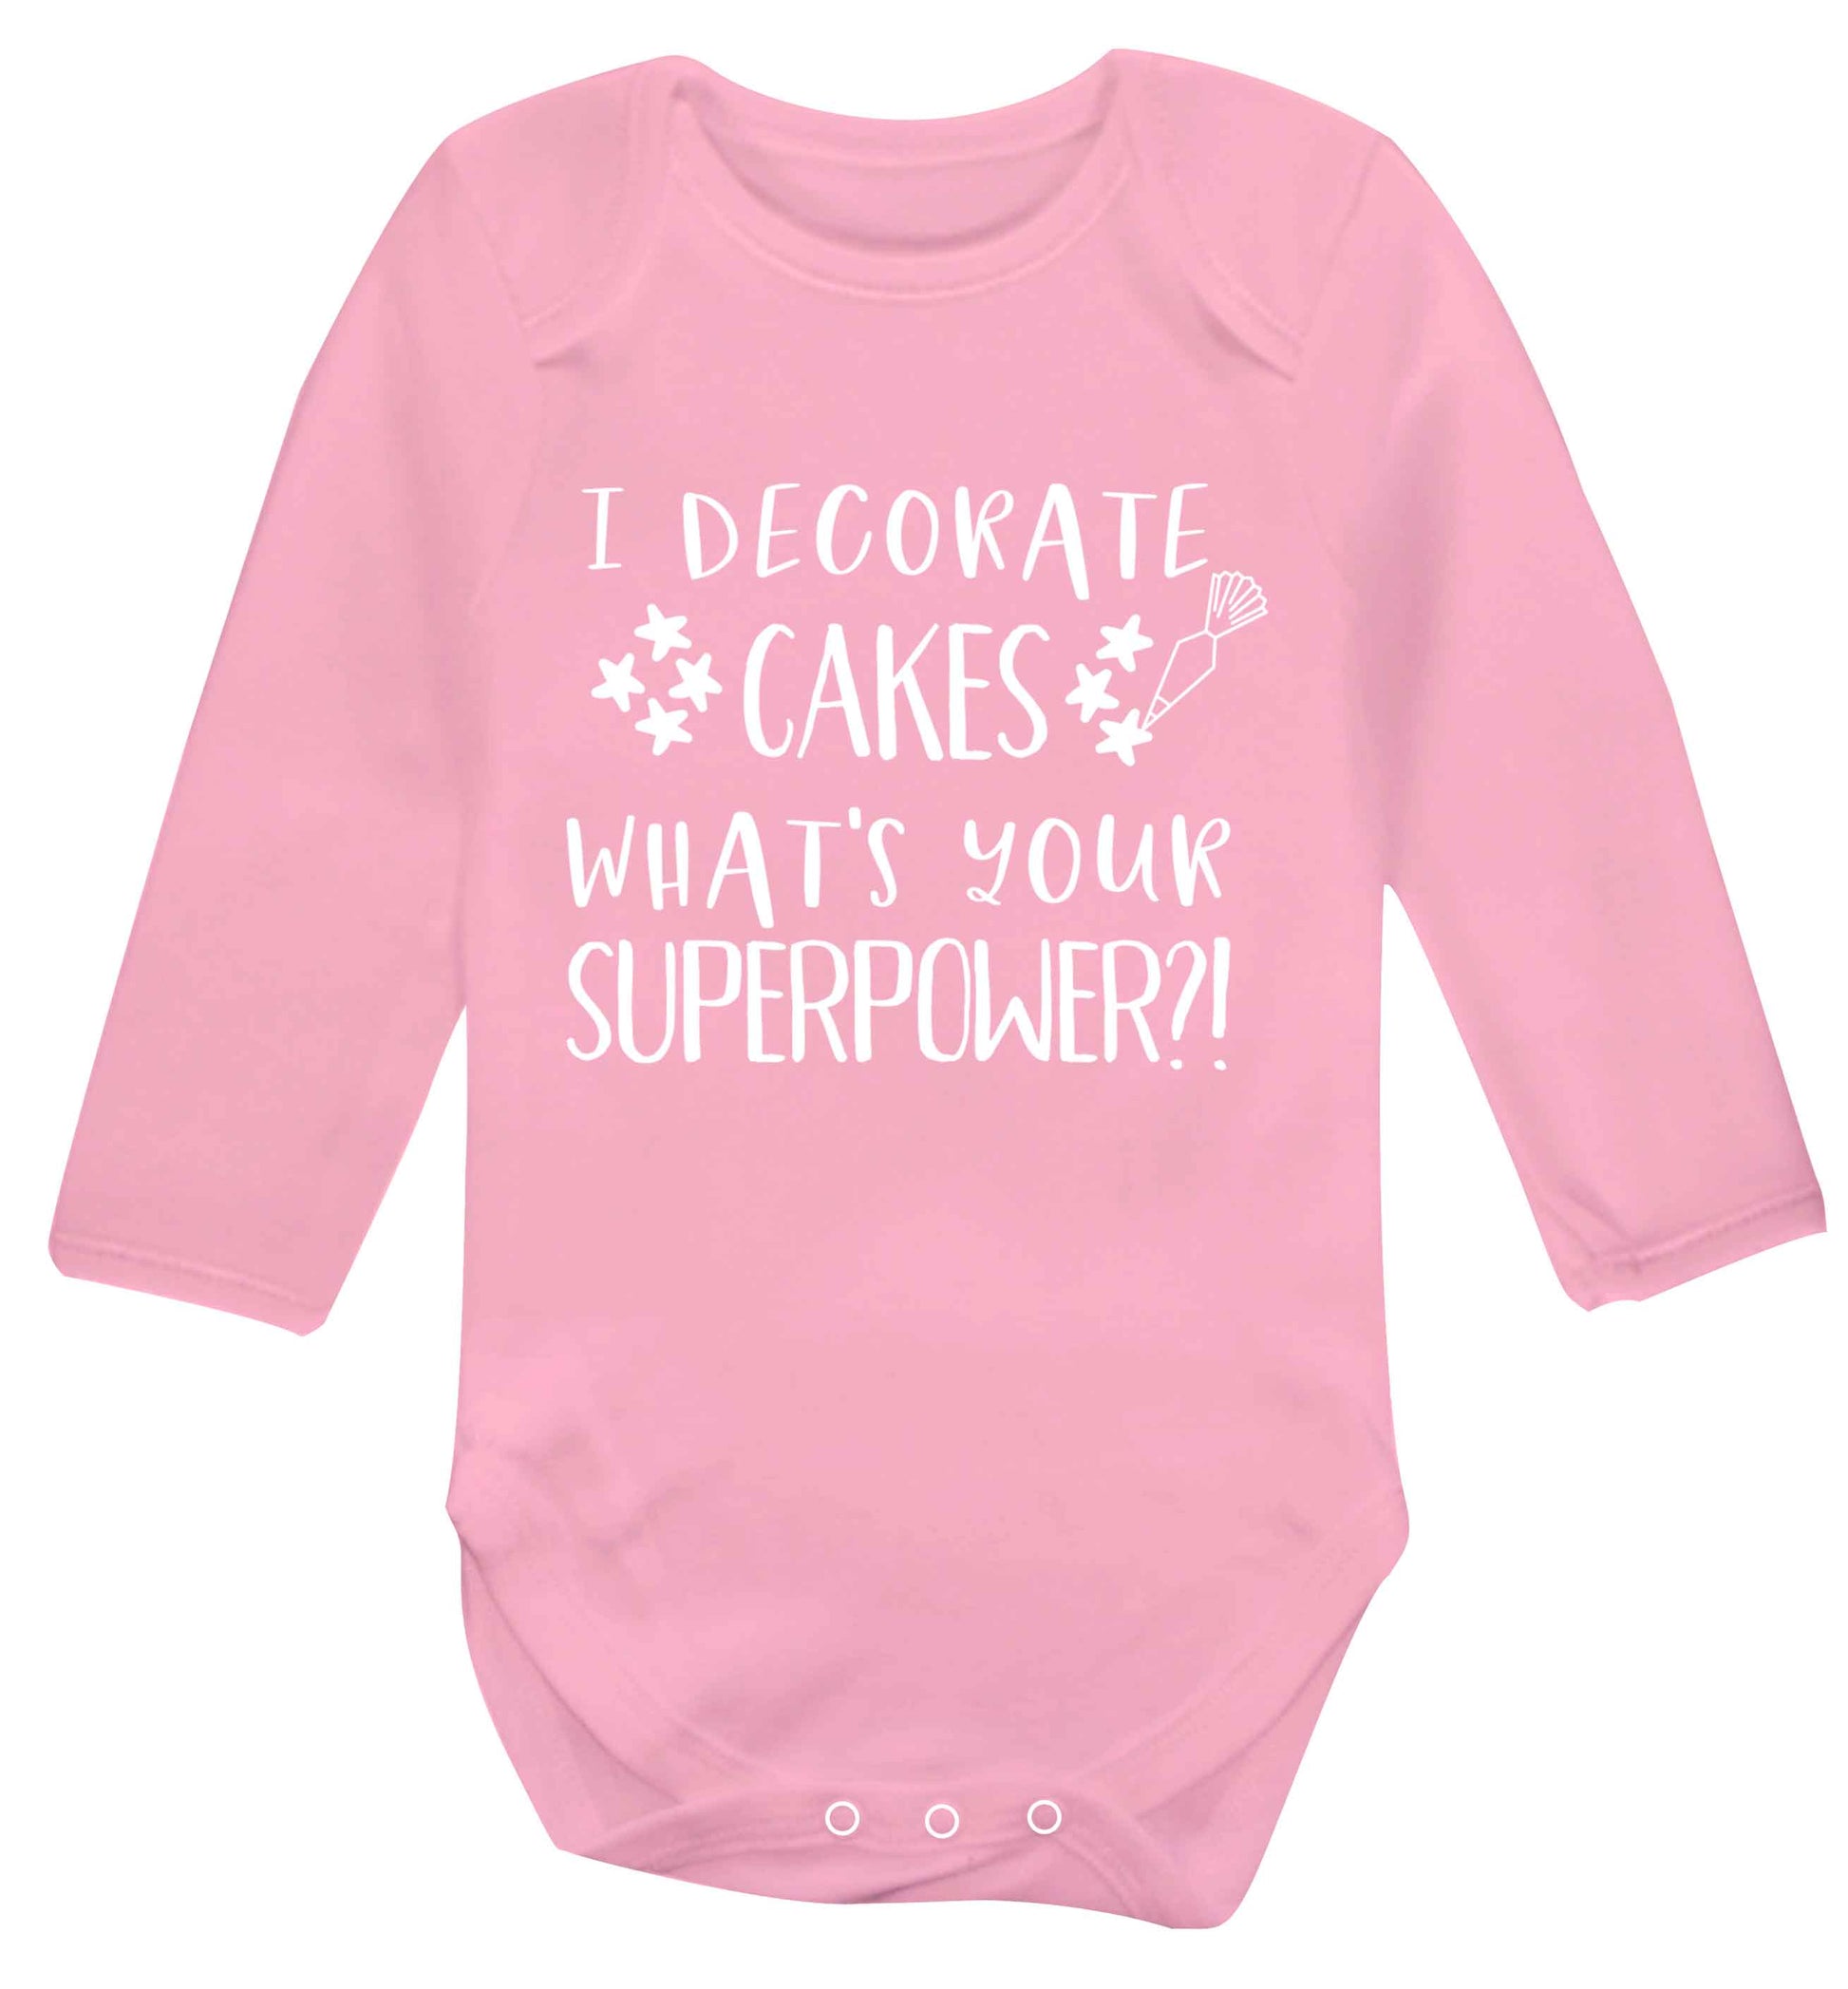 I decorate cakes what's your superpower?! Baby Vest long sleeved pale pink 6-12 months